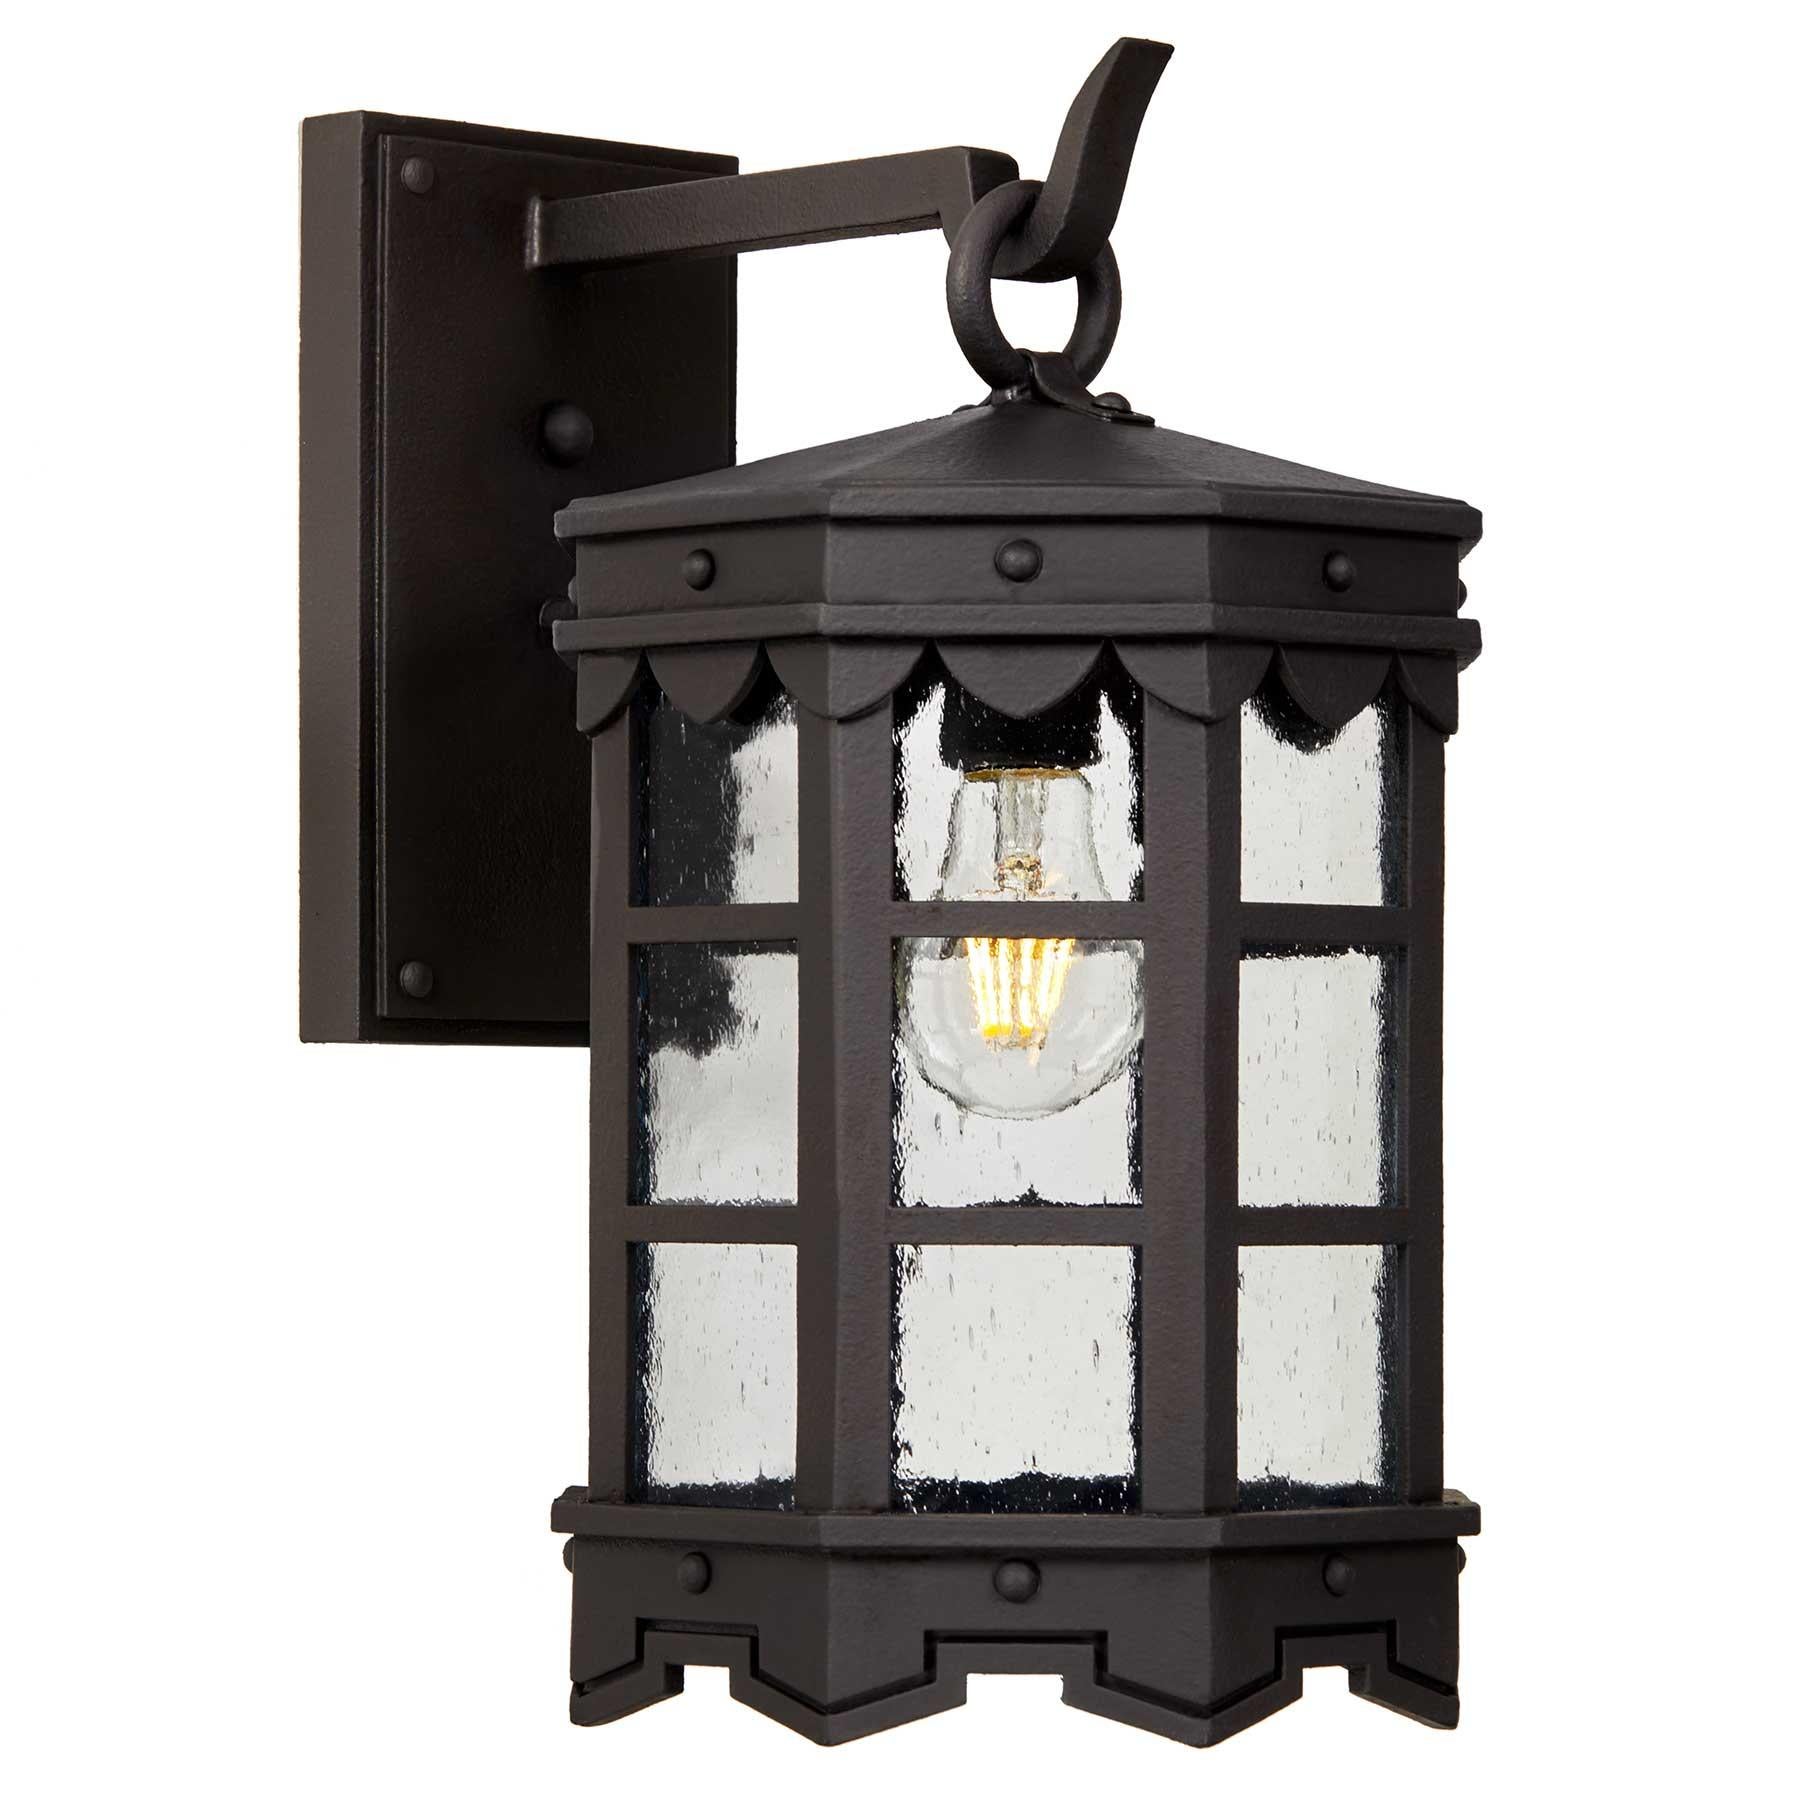 Our De La Guerra lantern finished in our premium SBLC Old World Finish has Mediterranean style precedence with historic profiles and contemporary geometric lines. A striking fixture during the day but even more so at night when the patterned hem